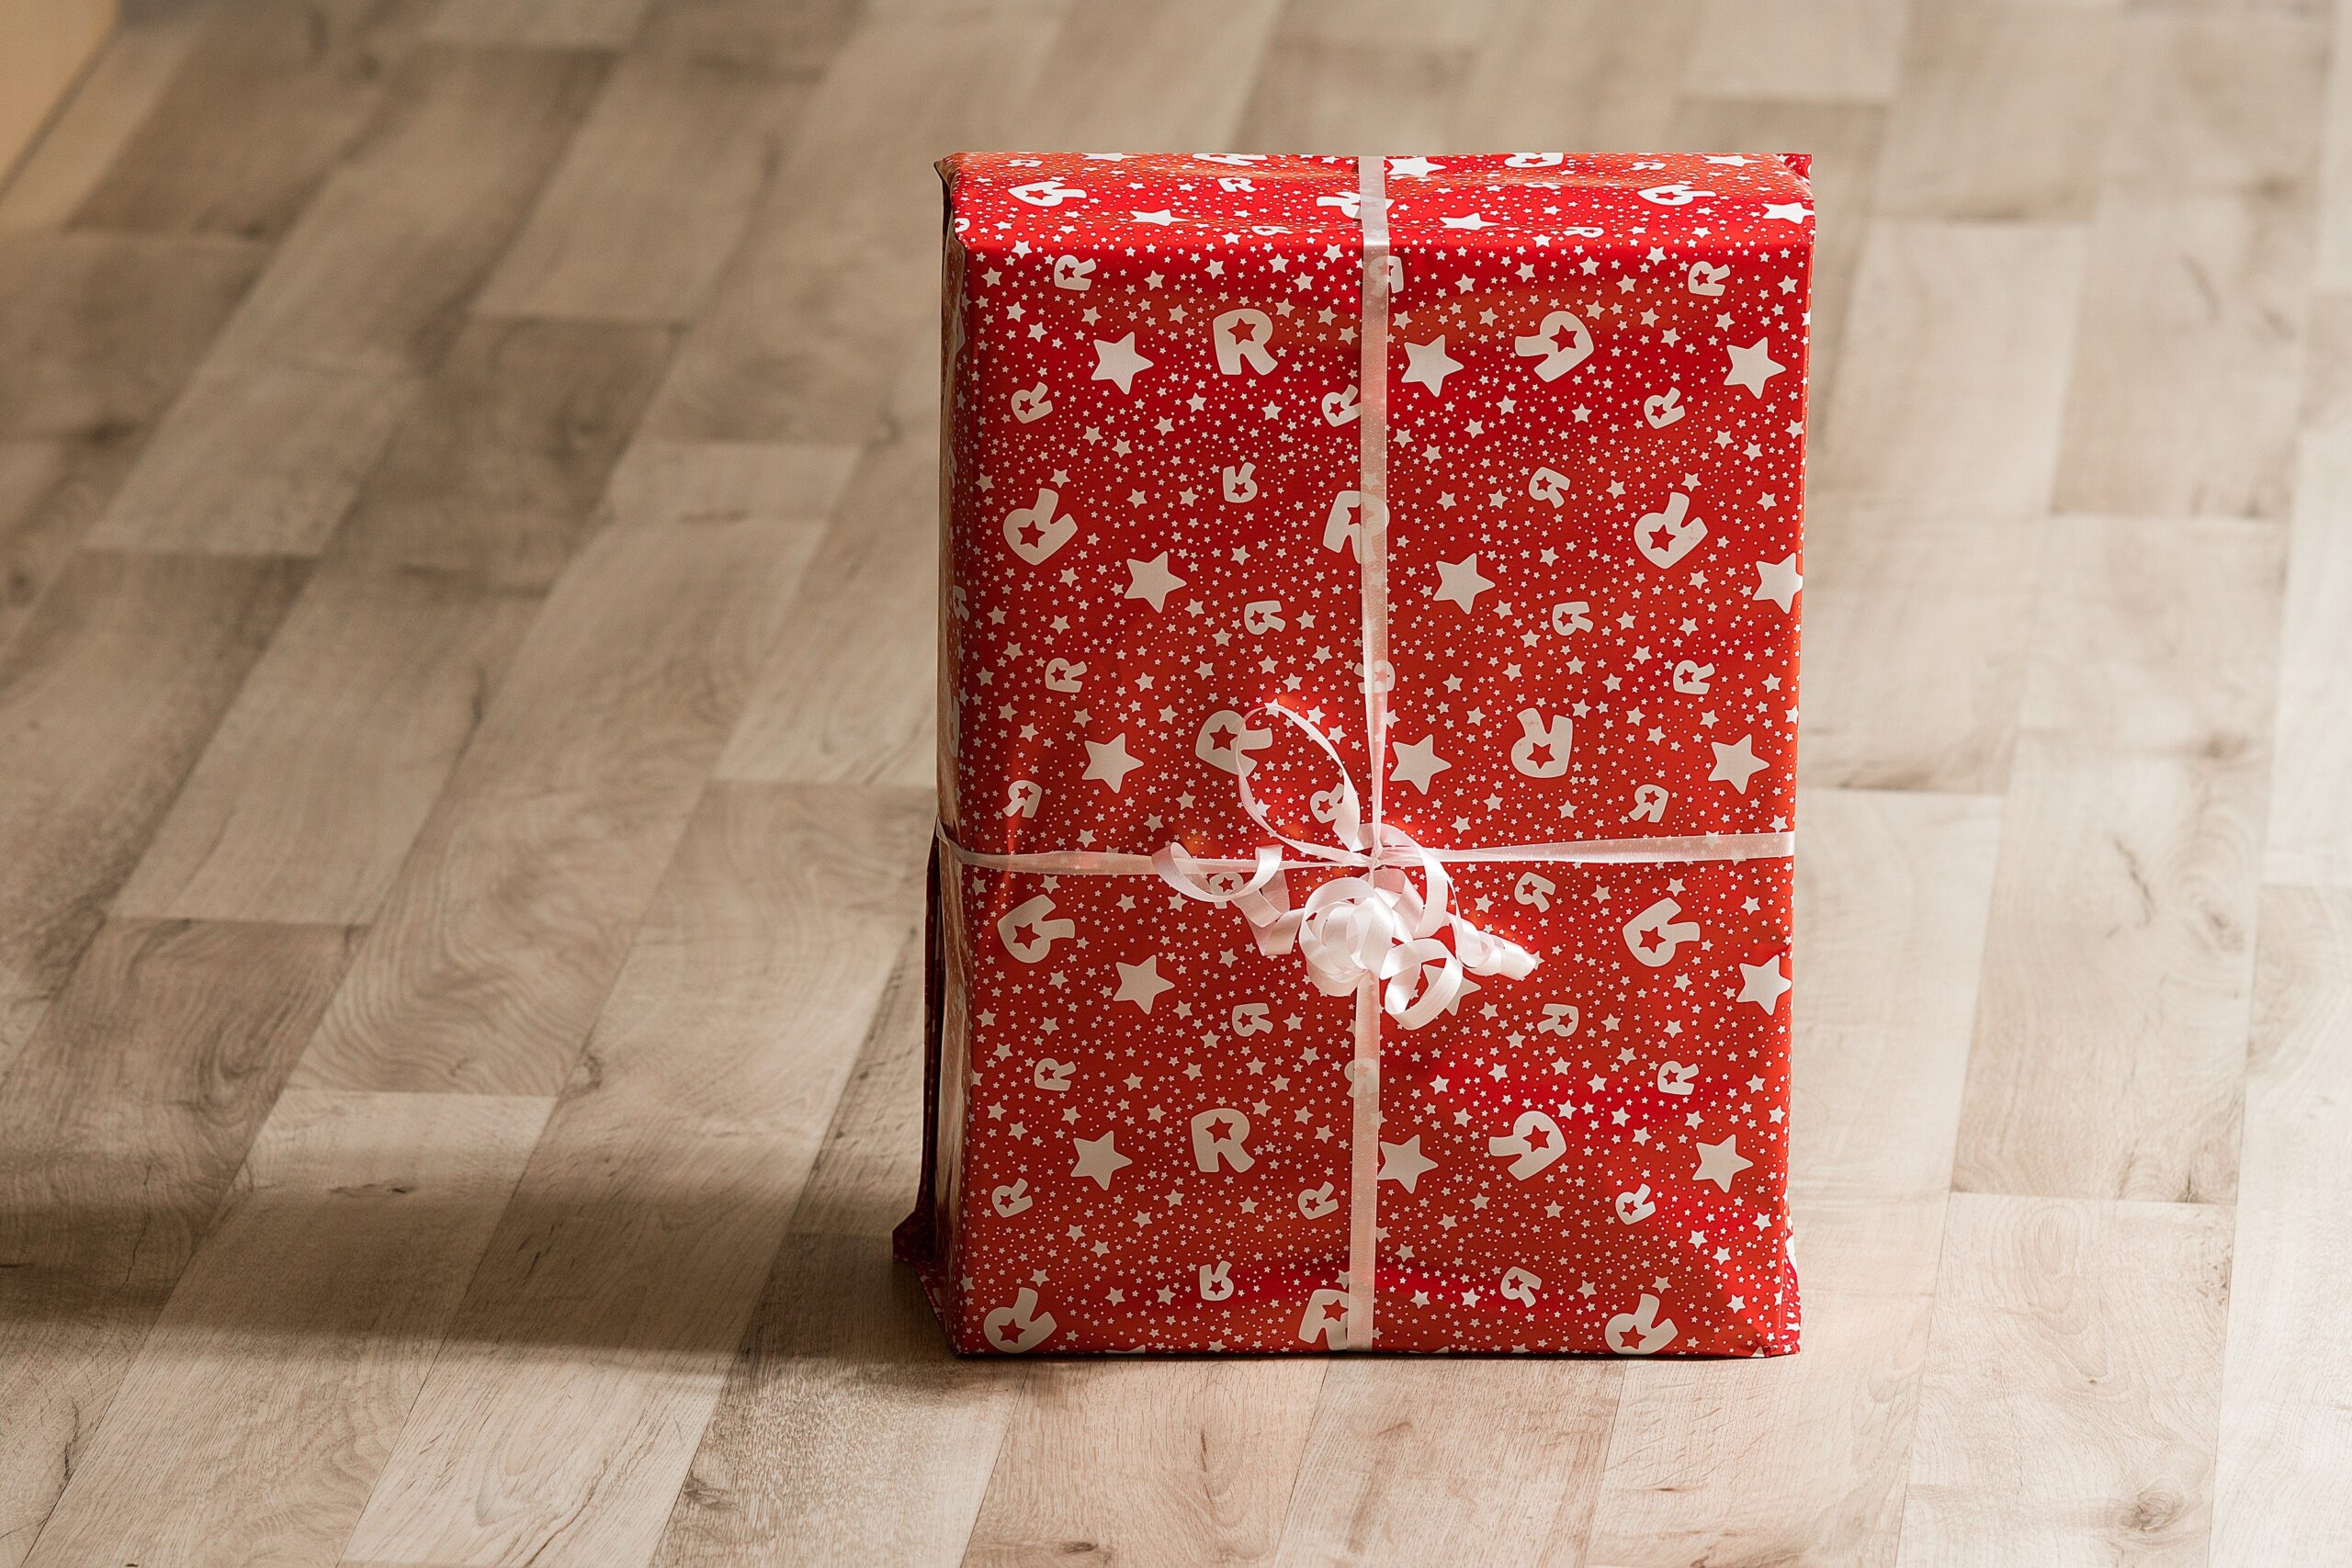 Six sustainable ideas for wrapping Christmas gifts in 2021